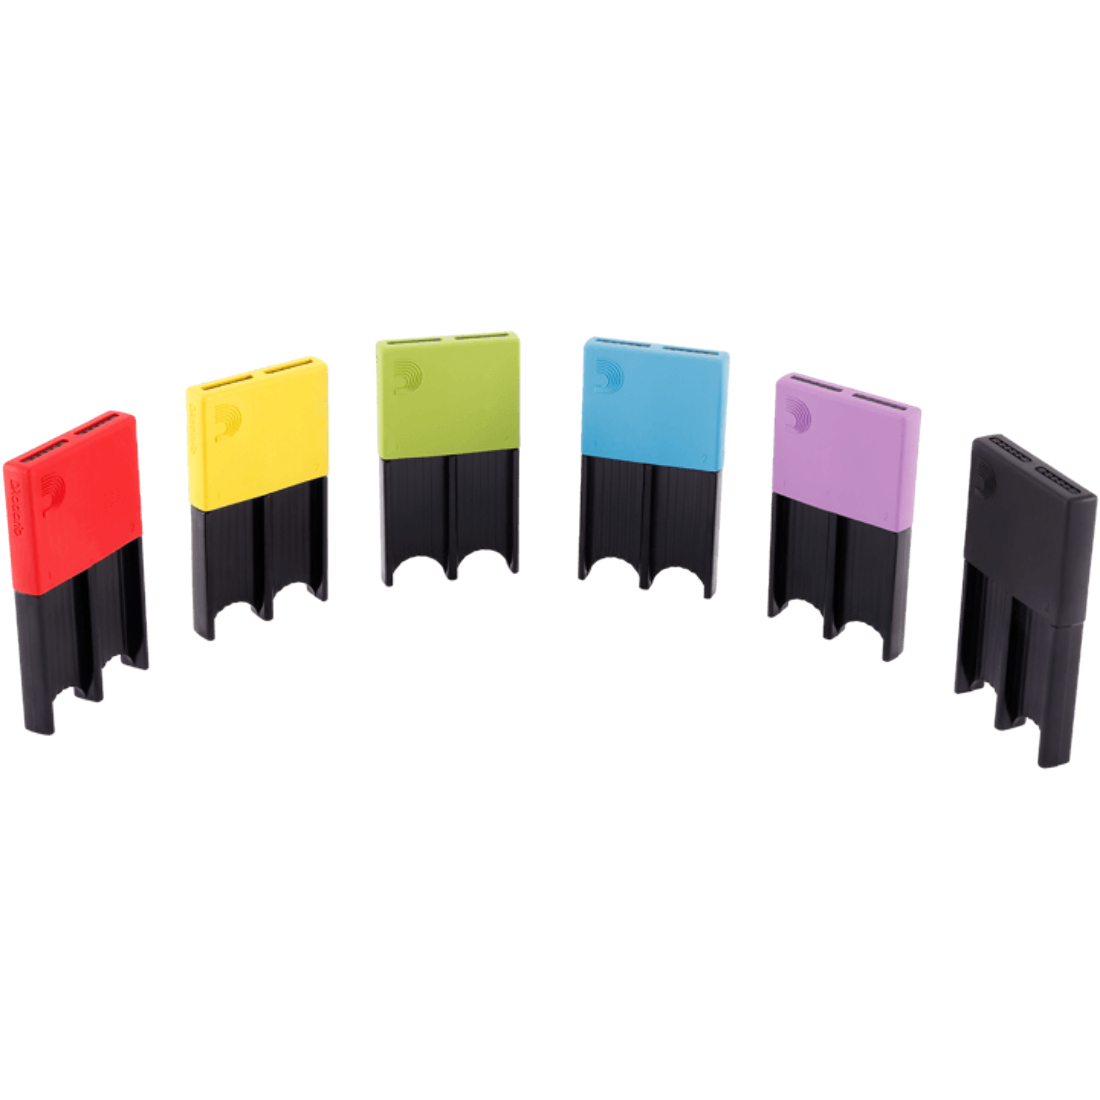 D'Addario reed guards, in multiple colors